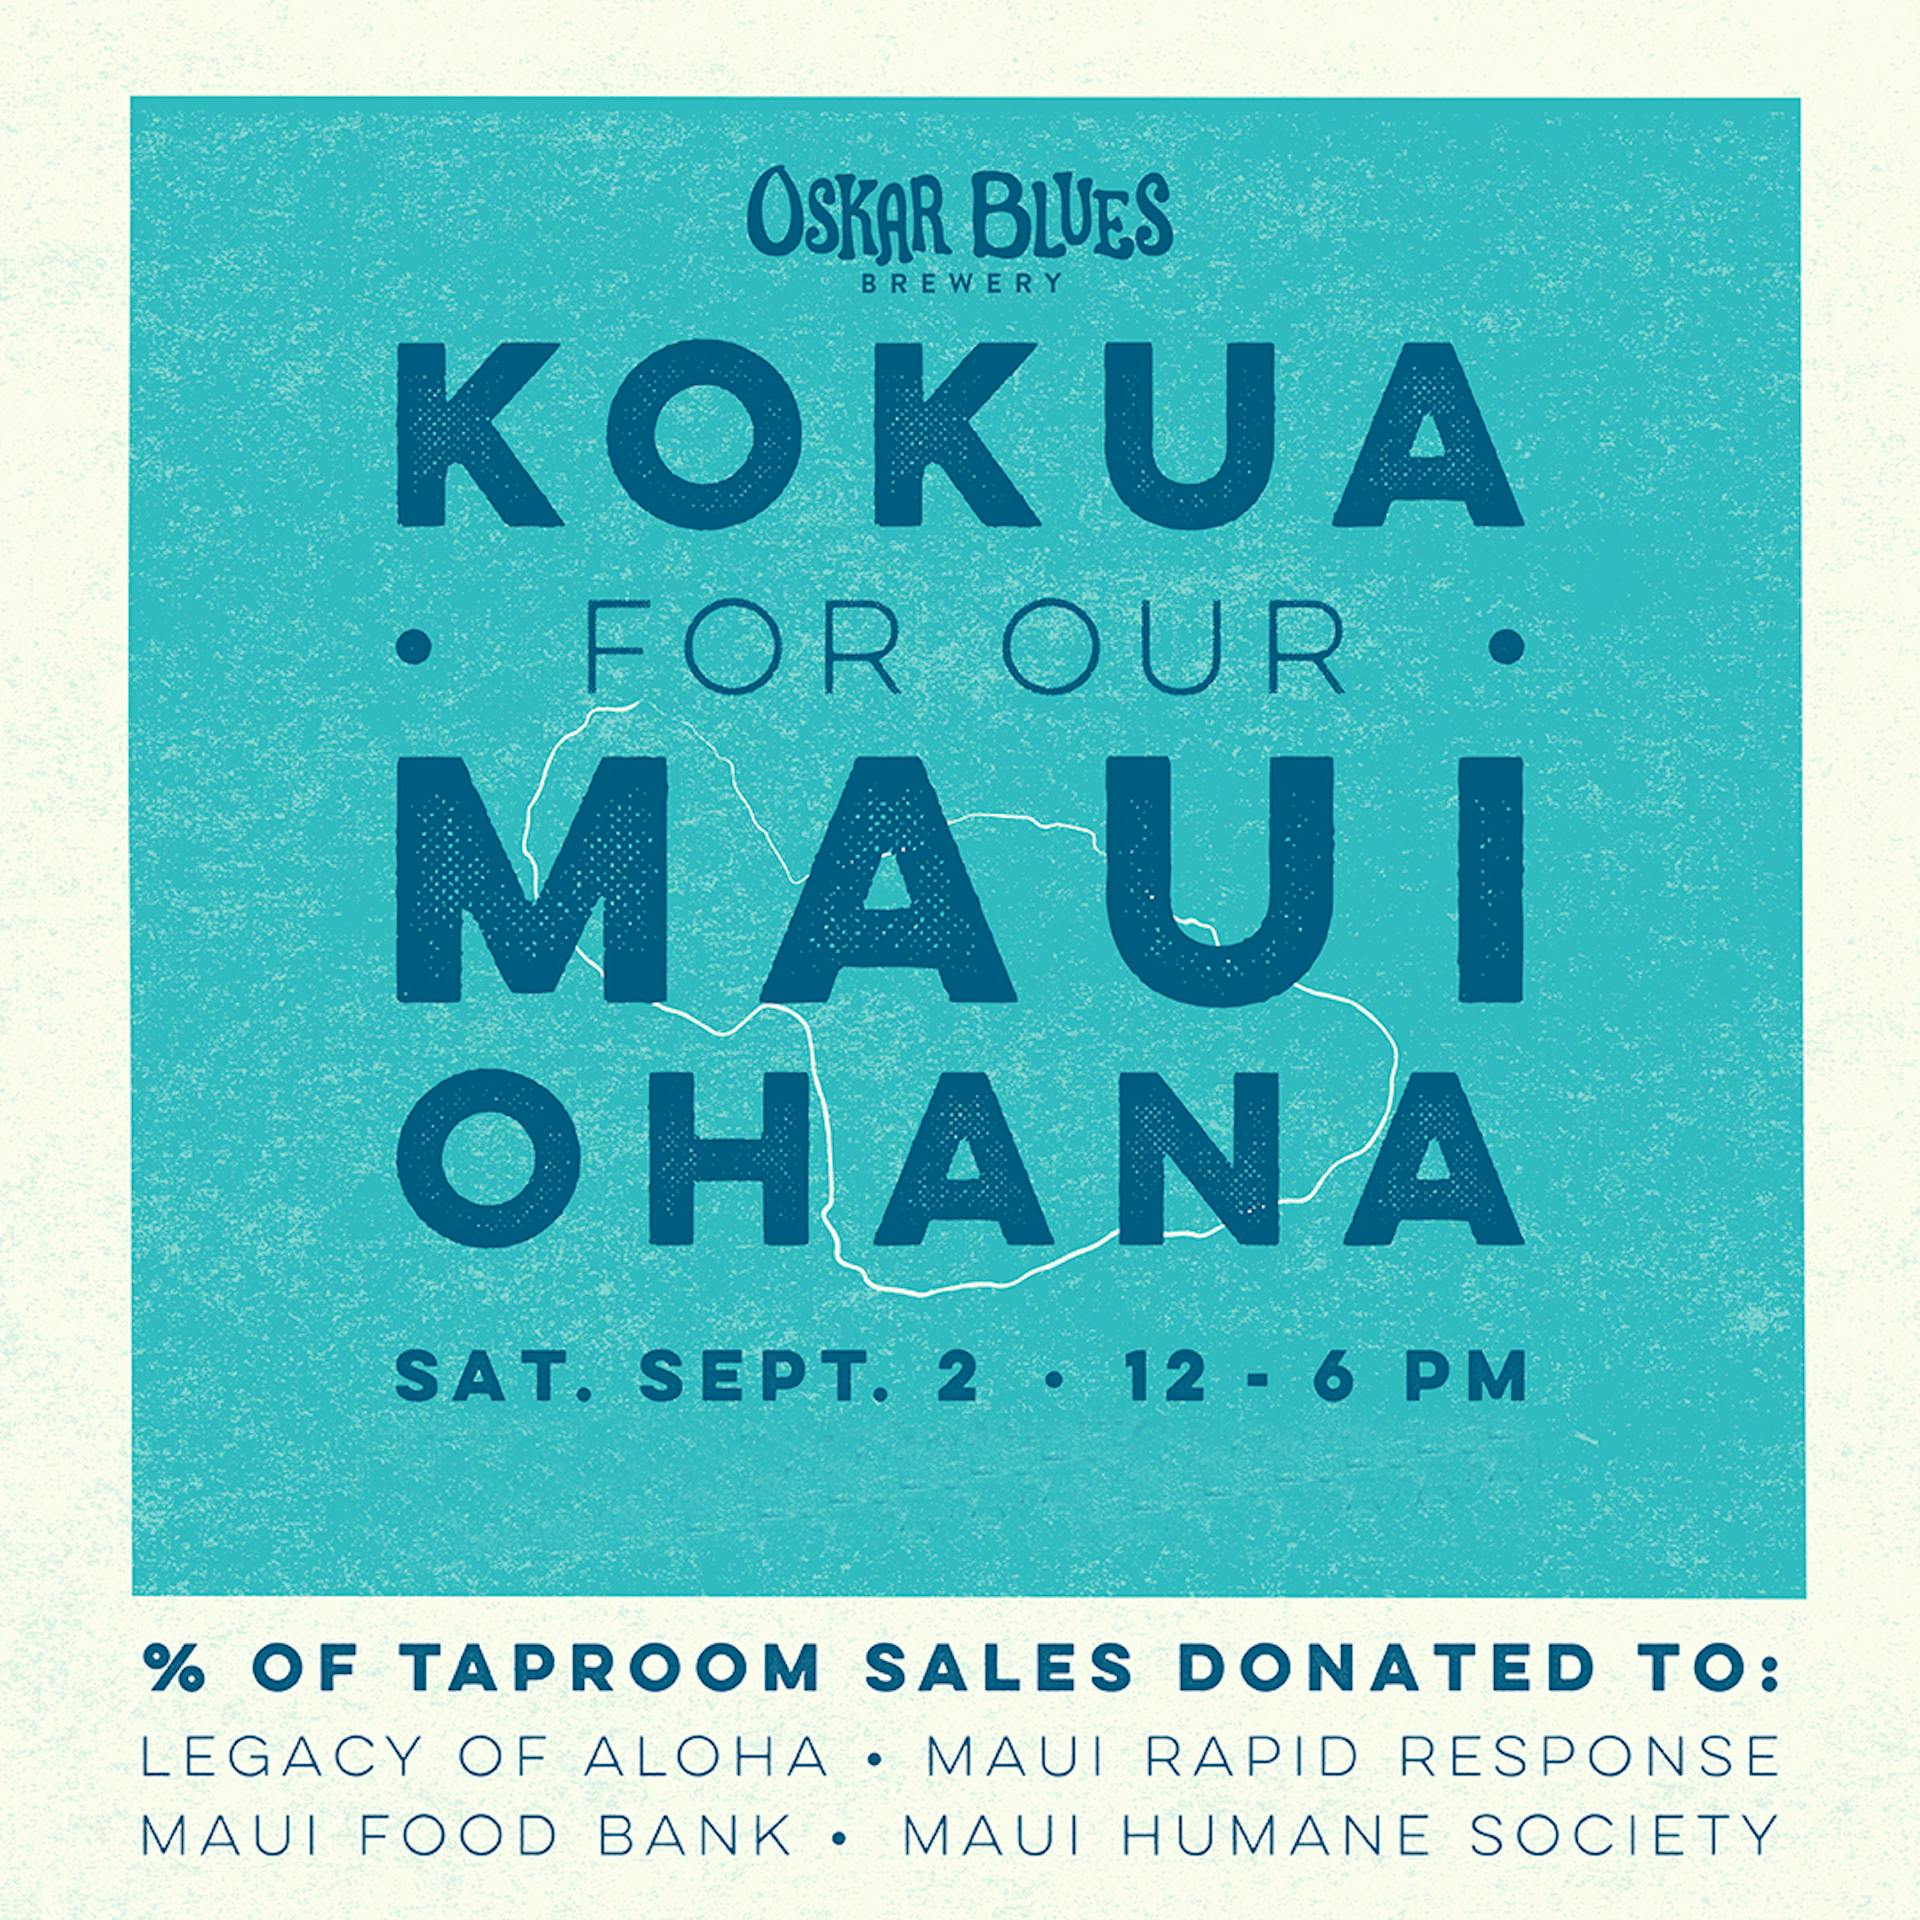 Promotional graphic for Kokua for Our Maui Ohana fundraising event on Saturday, September 2 from 12-6 PM, with ocean blue backdrop and Hawaii outline. Text indicates a percentage of taproom sales will be donated to Legacy of Aloha, Maui Rapid Response, Maui Food Bank, and Maui Humane Society.